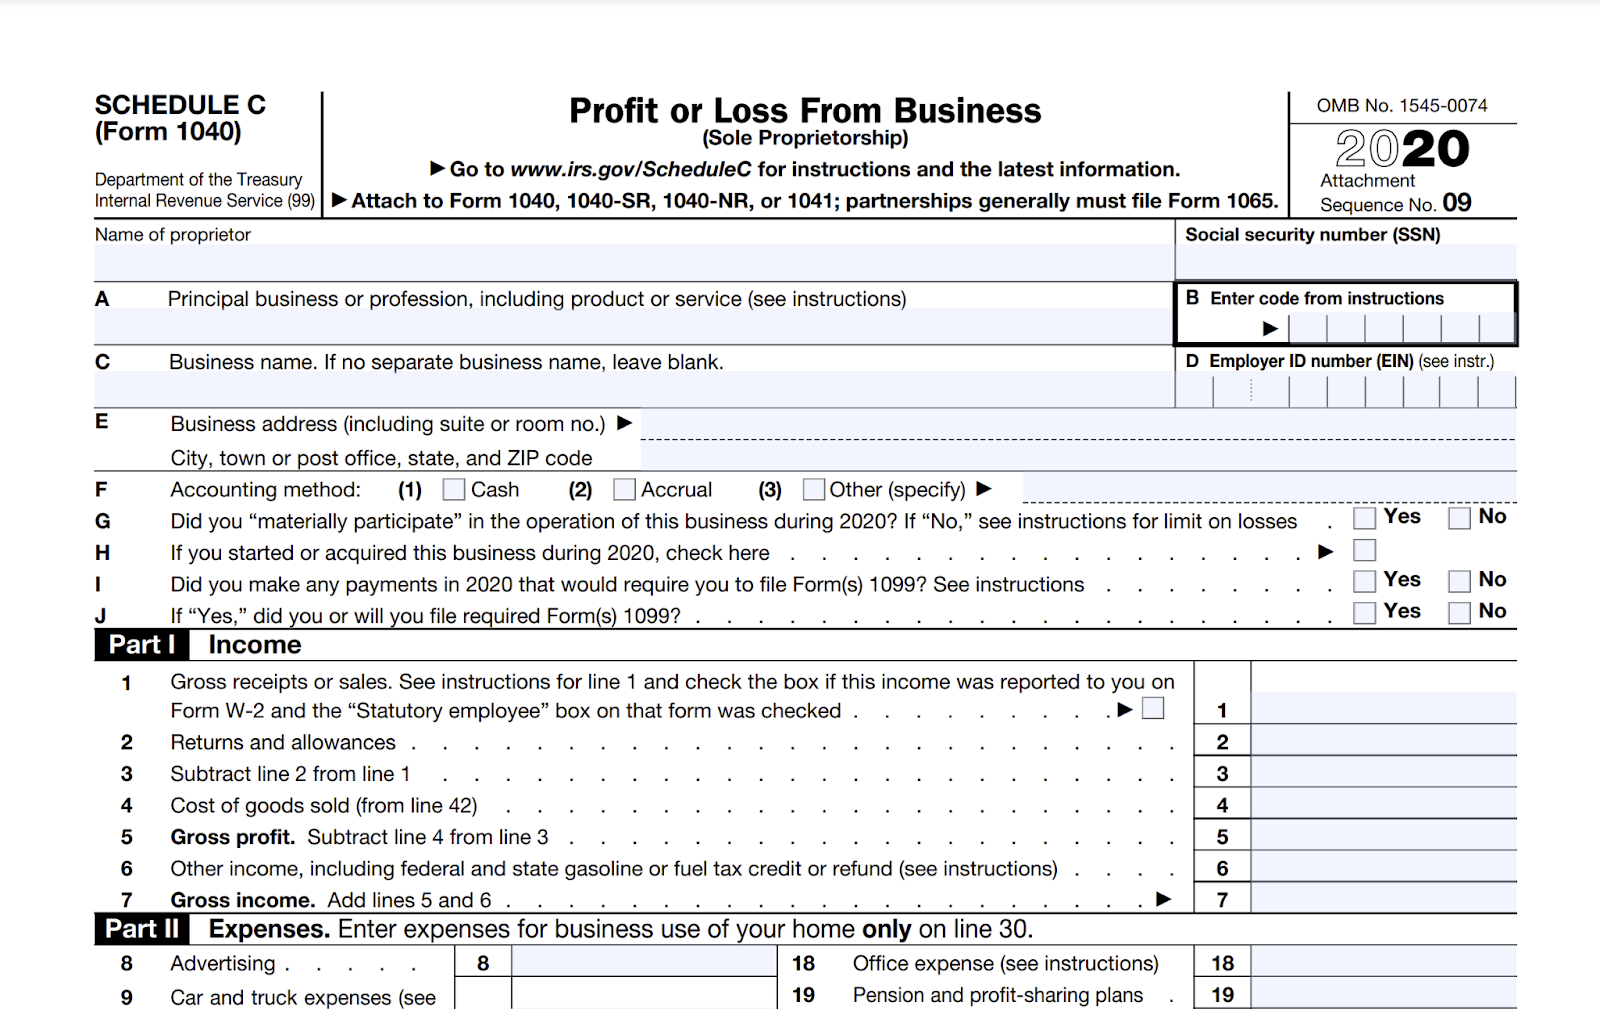 Screenshot of IRS Form 1040 Schedule C for Profit or Loss From Business